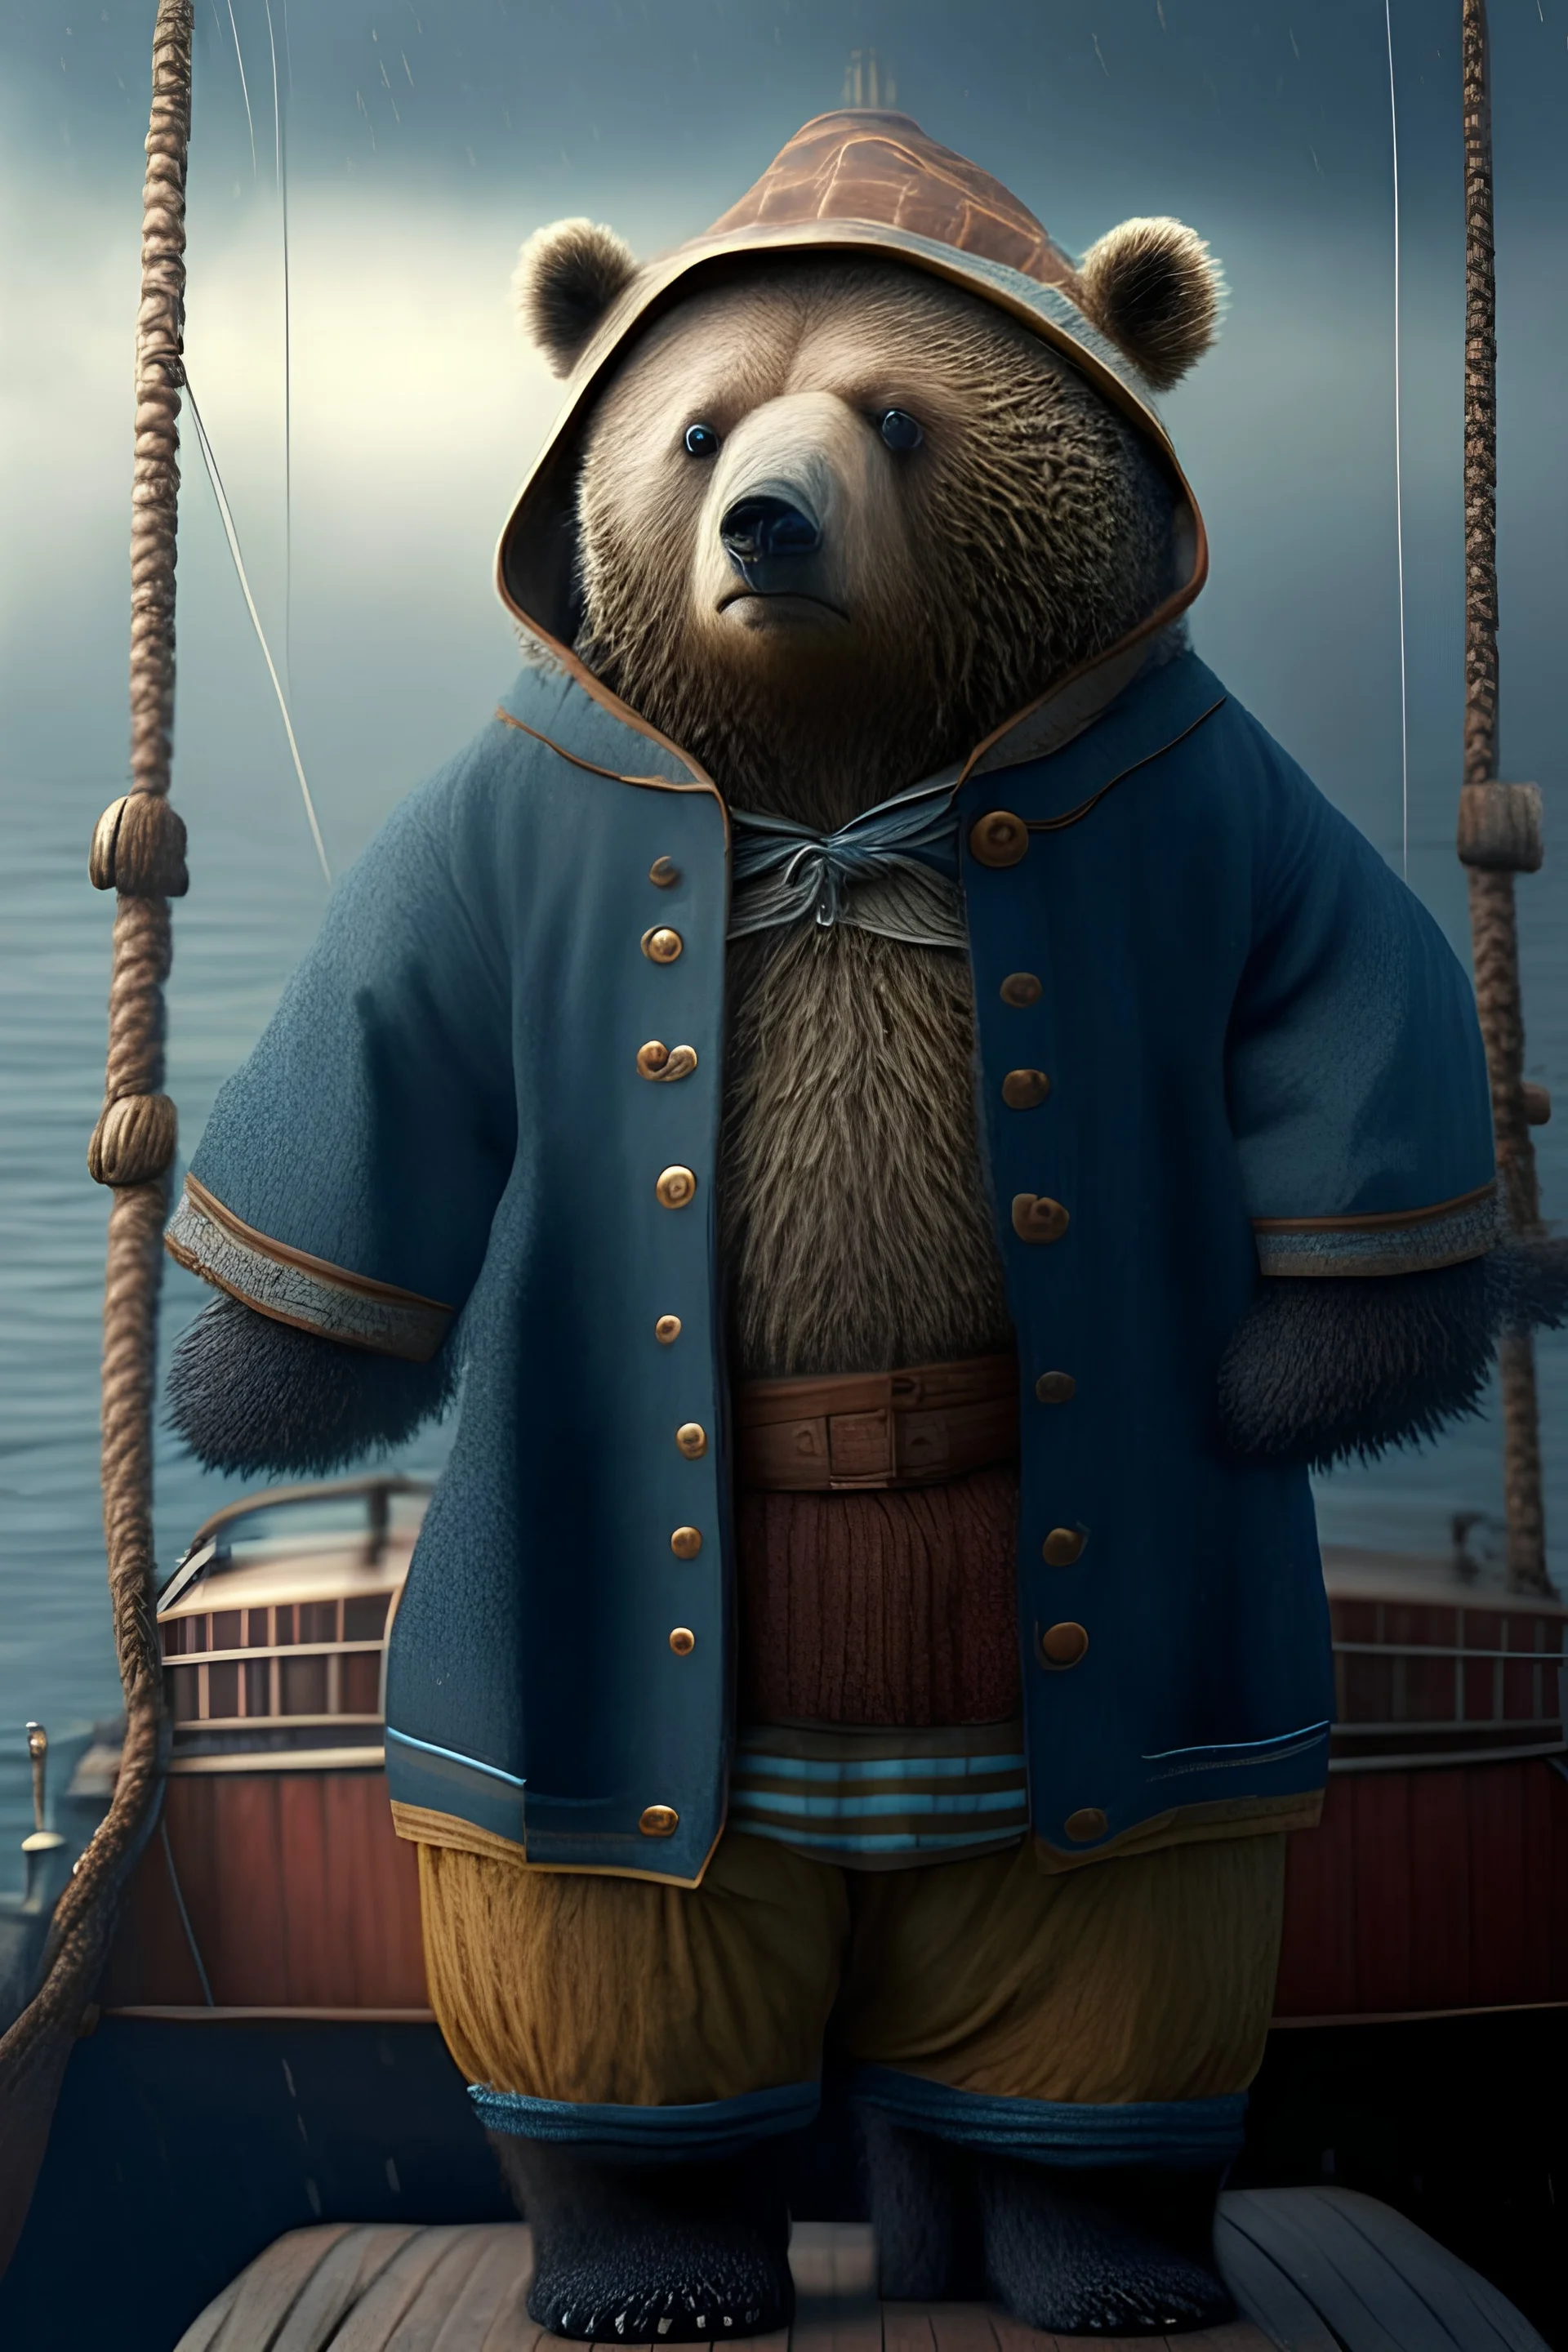 A bipedal bear in fisherman's clothing on a ship